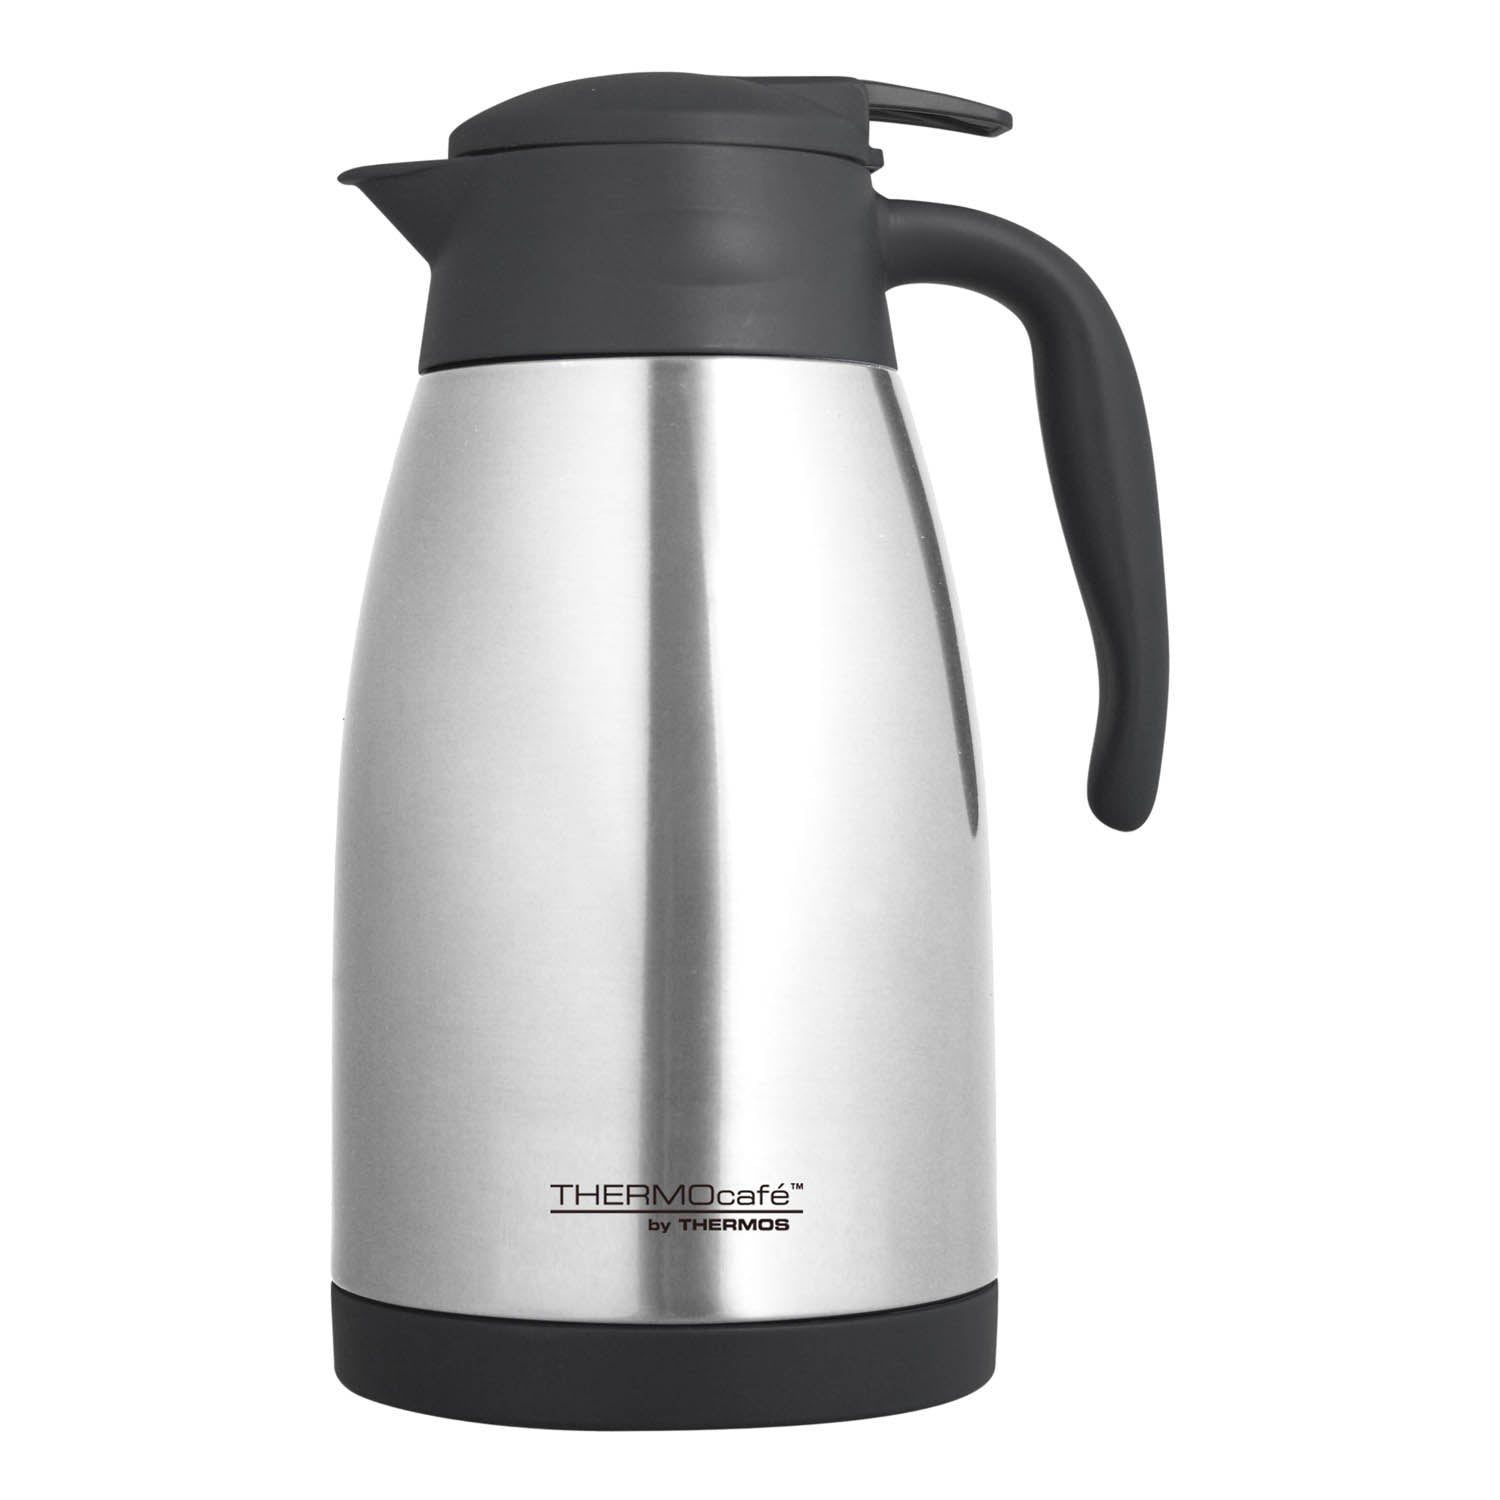 ThermoCafe Stainless Steel Carafe 1.5Litres